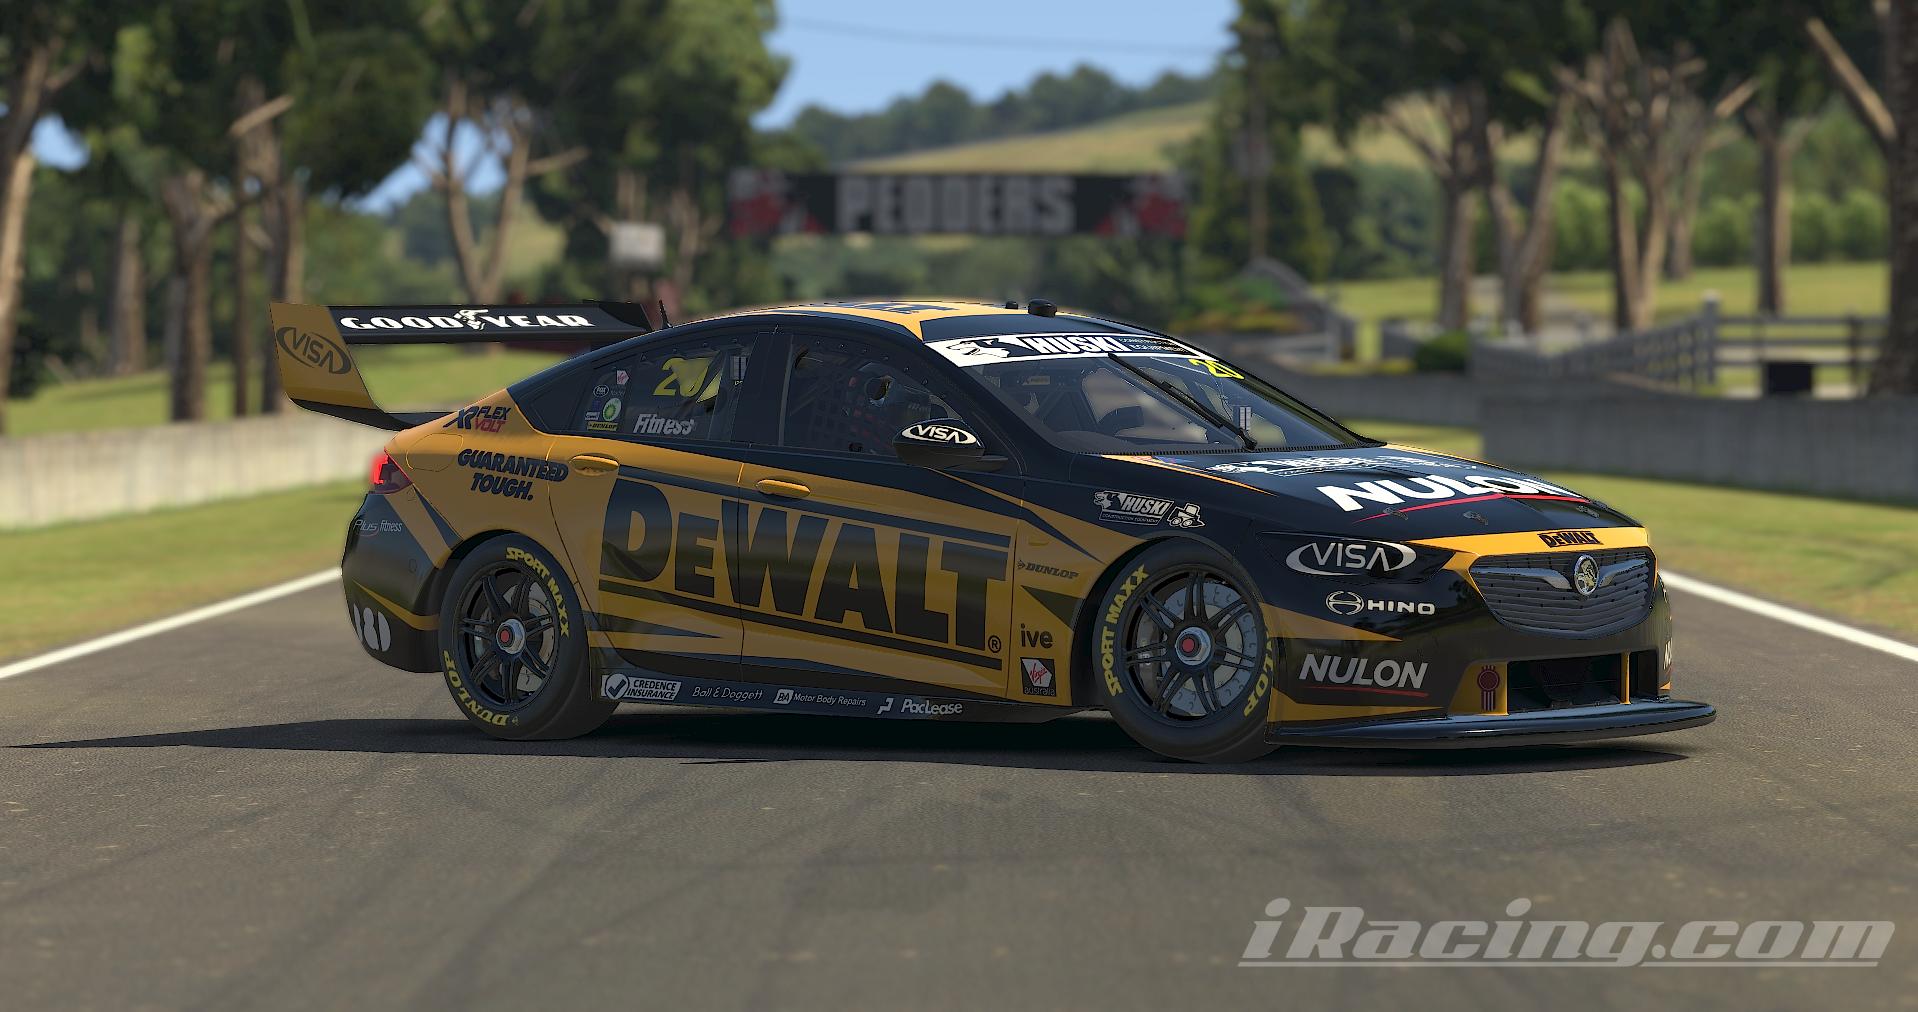 Preview of 2020 DeWALT Racing Scott Pye Team 18 by Rob Fitness